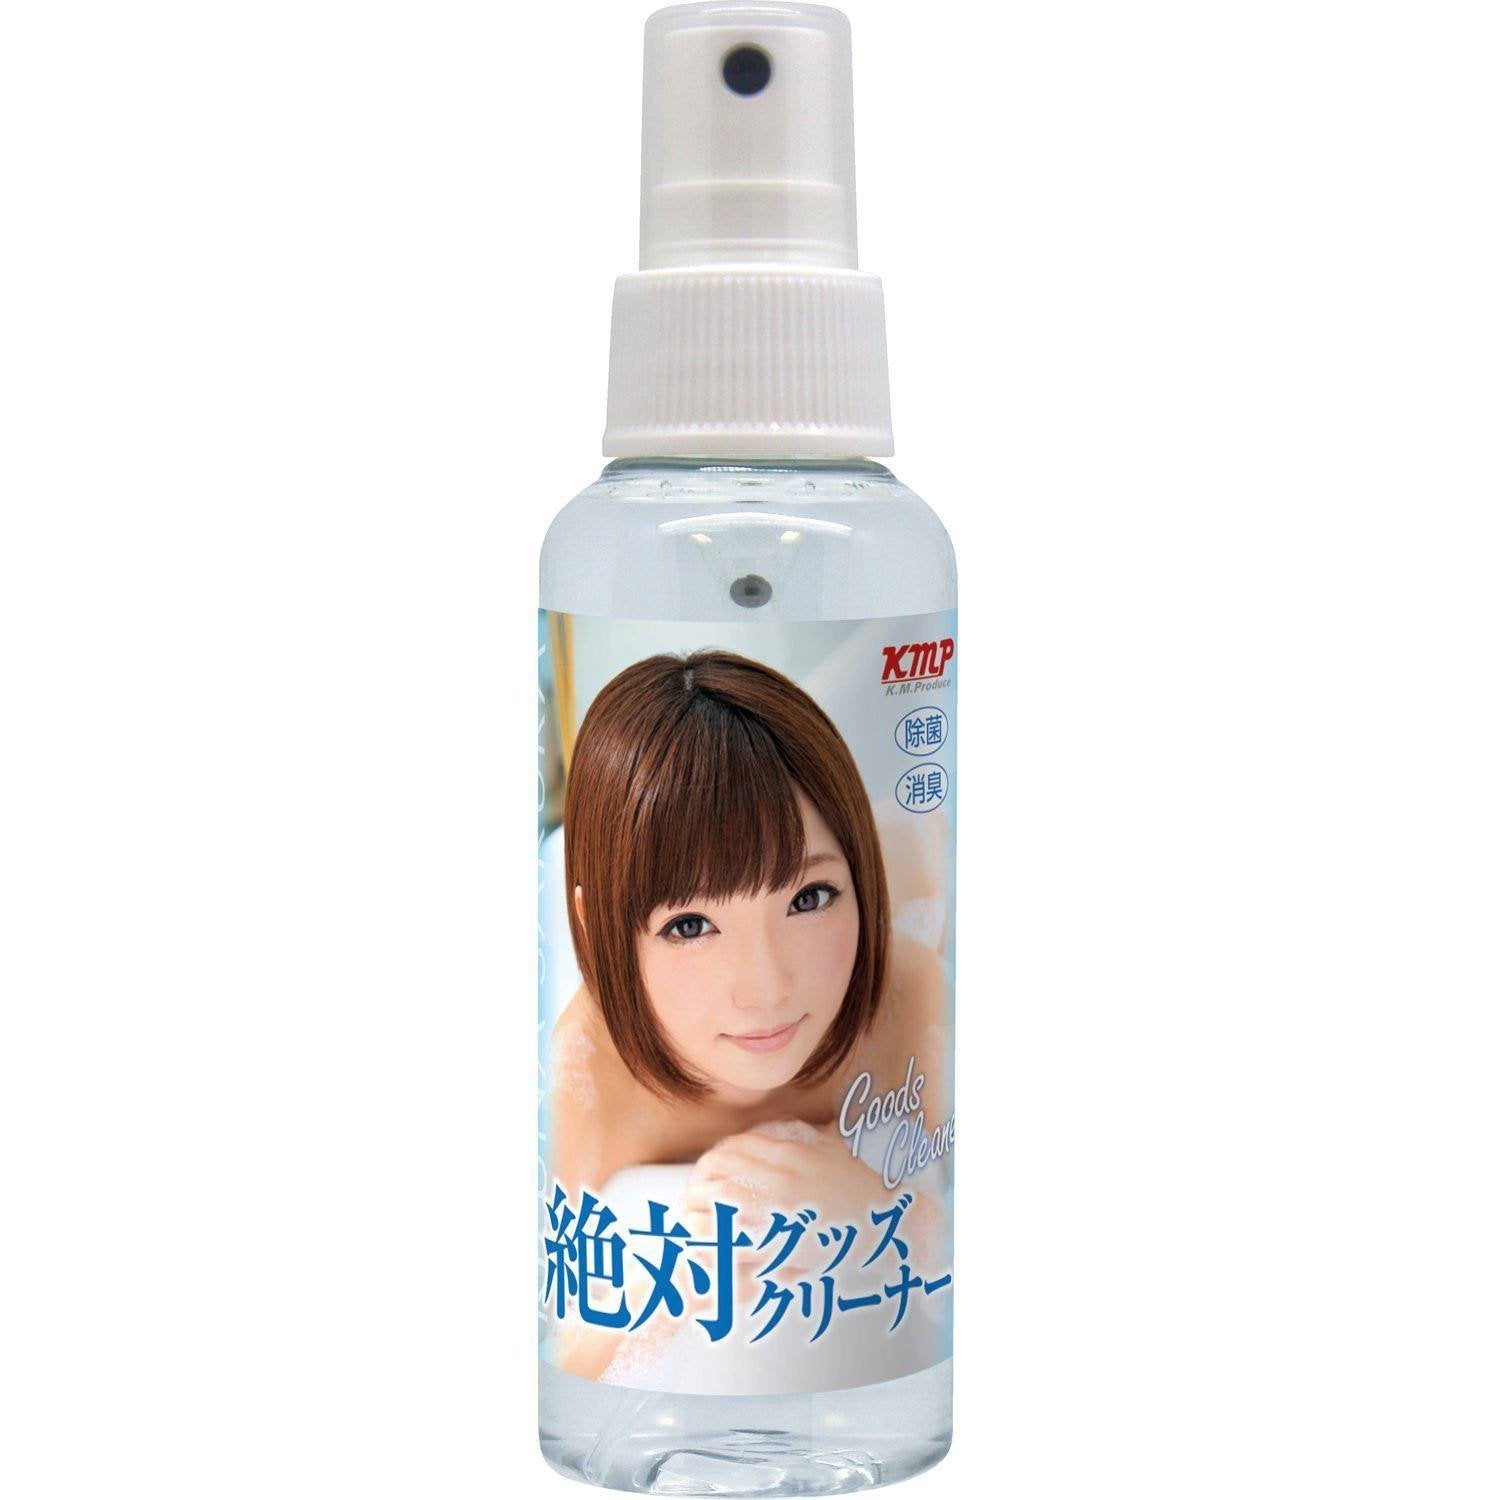 KMP - Zettai Goods Toy Cleaner 100ml (Clear) Toy Cleaners Durio Asia